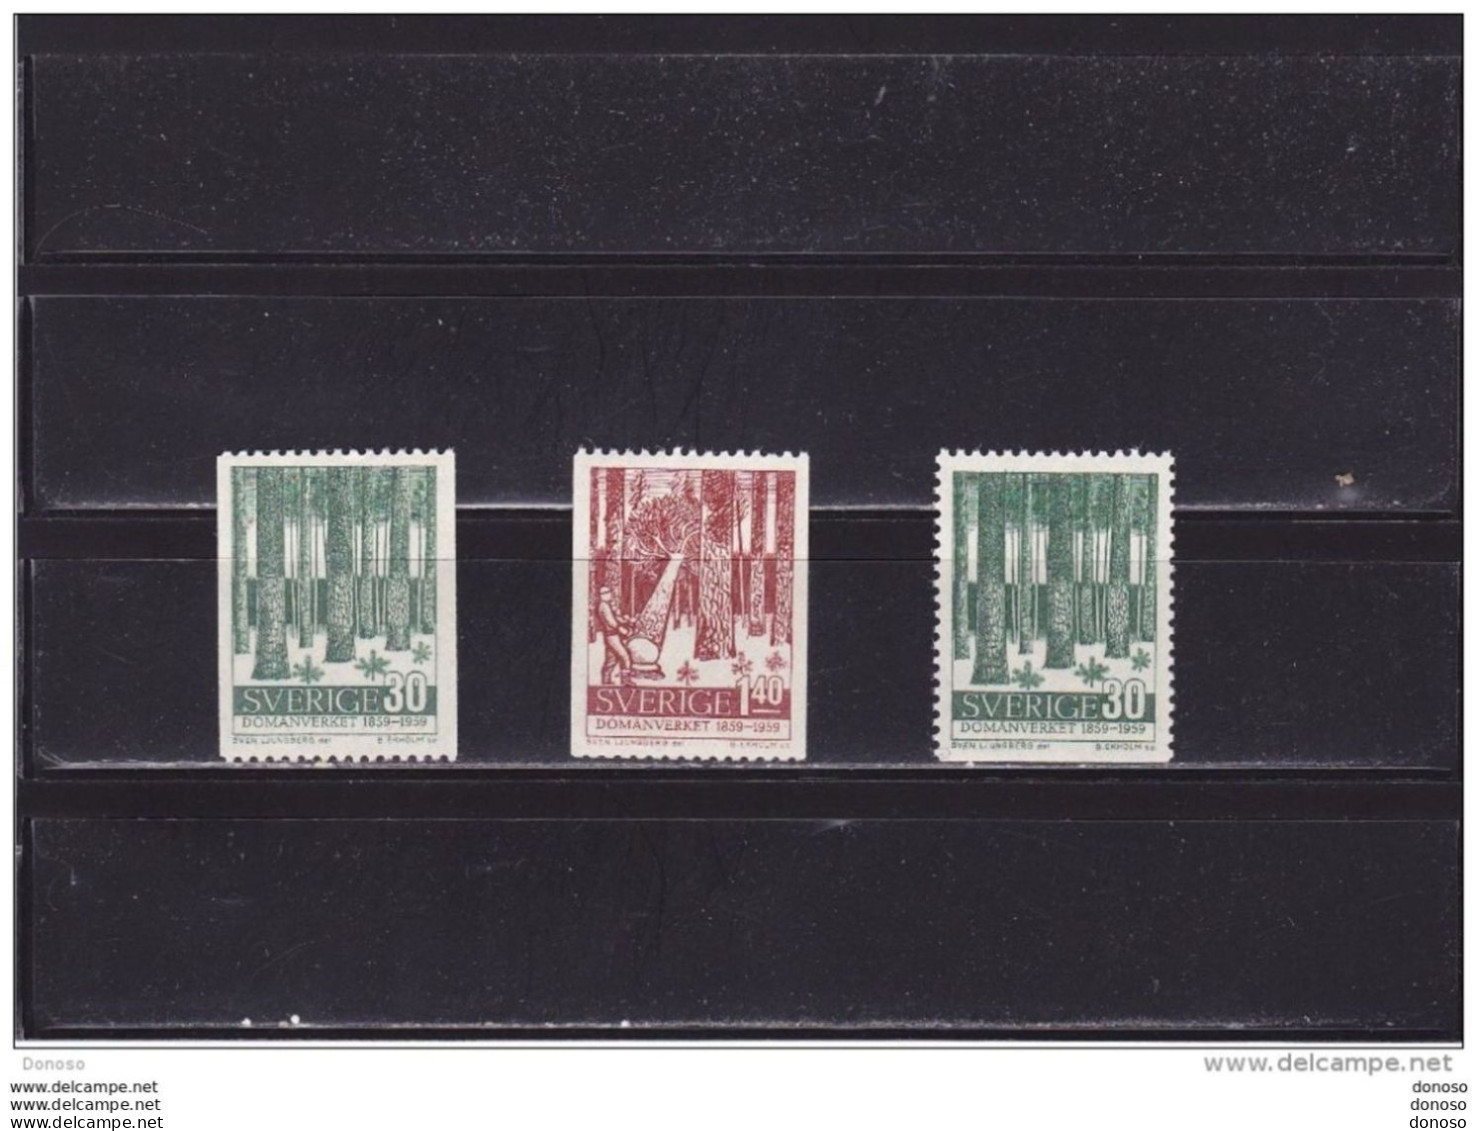 SUEDE 1959 FORÊTS Yvert 442-443 + 442a NEUF**MNH Cote : 9 Euros - Nuovi